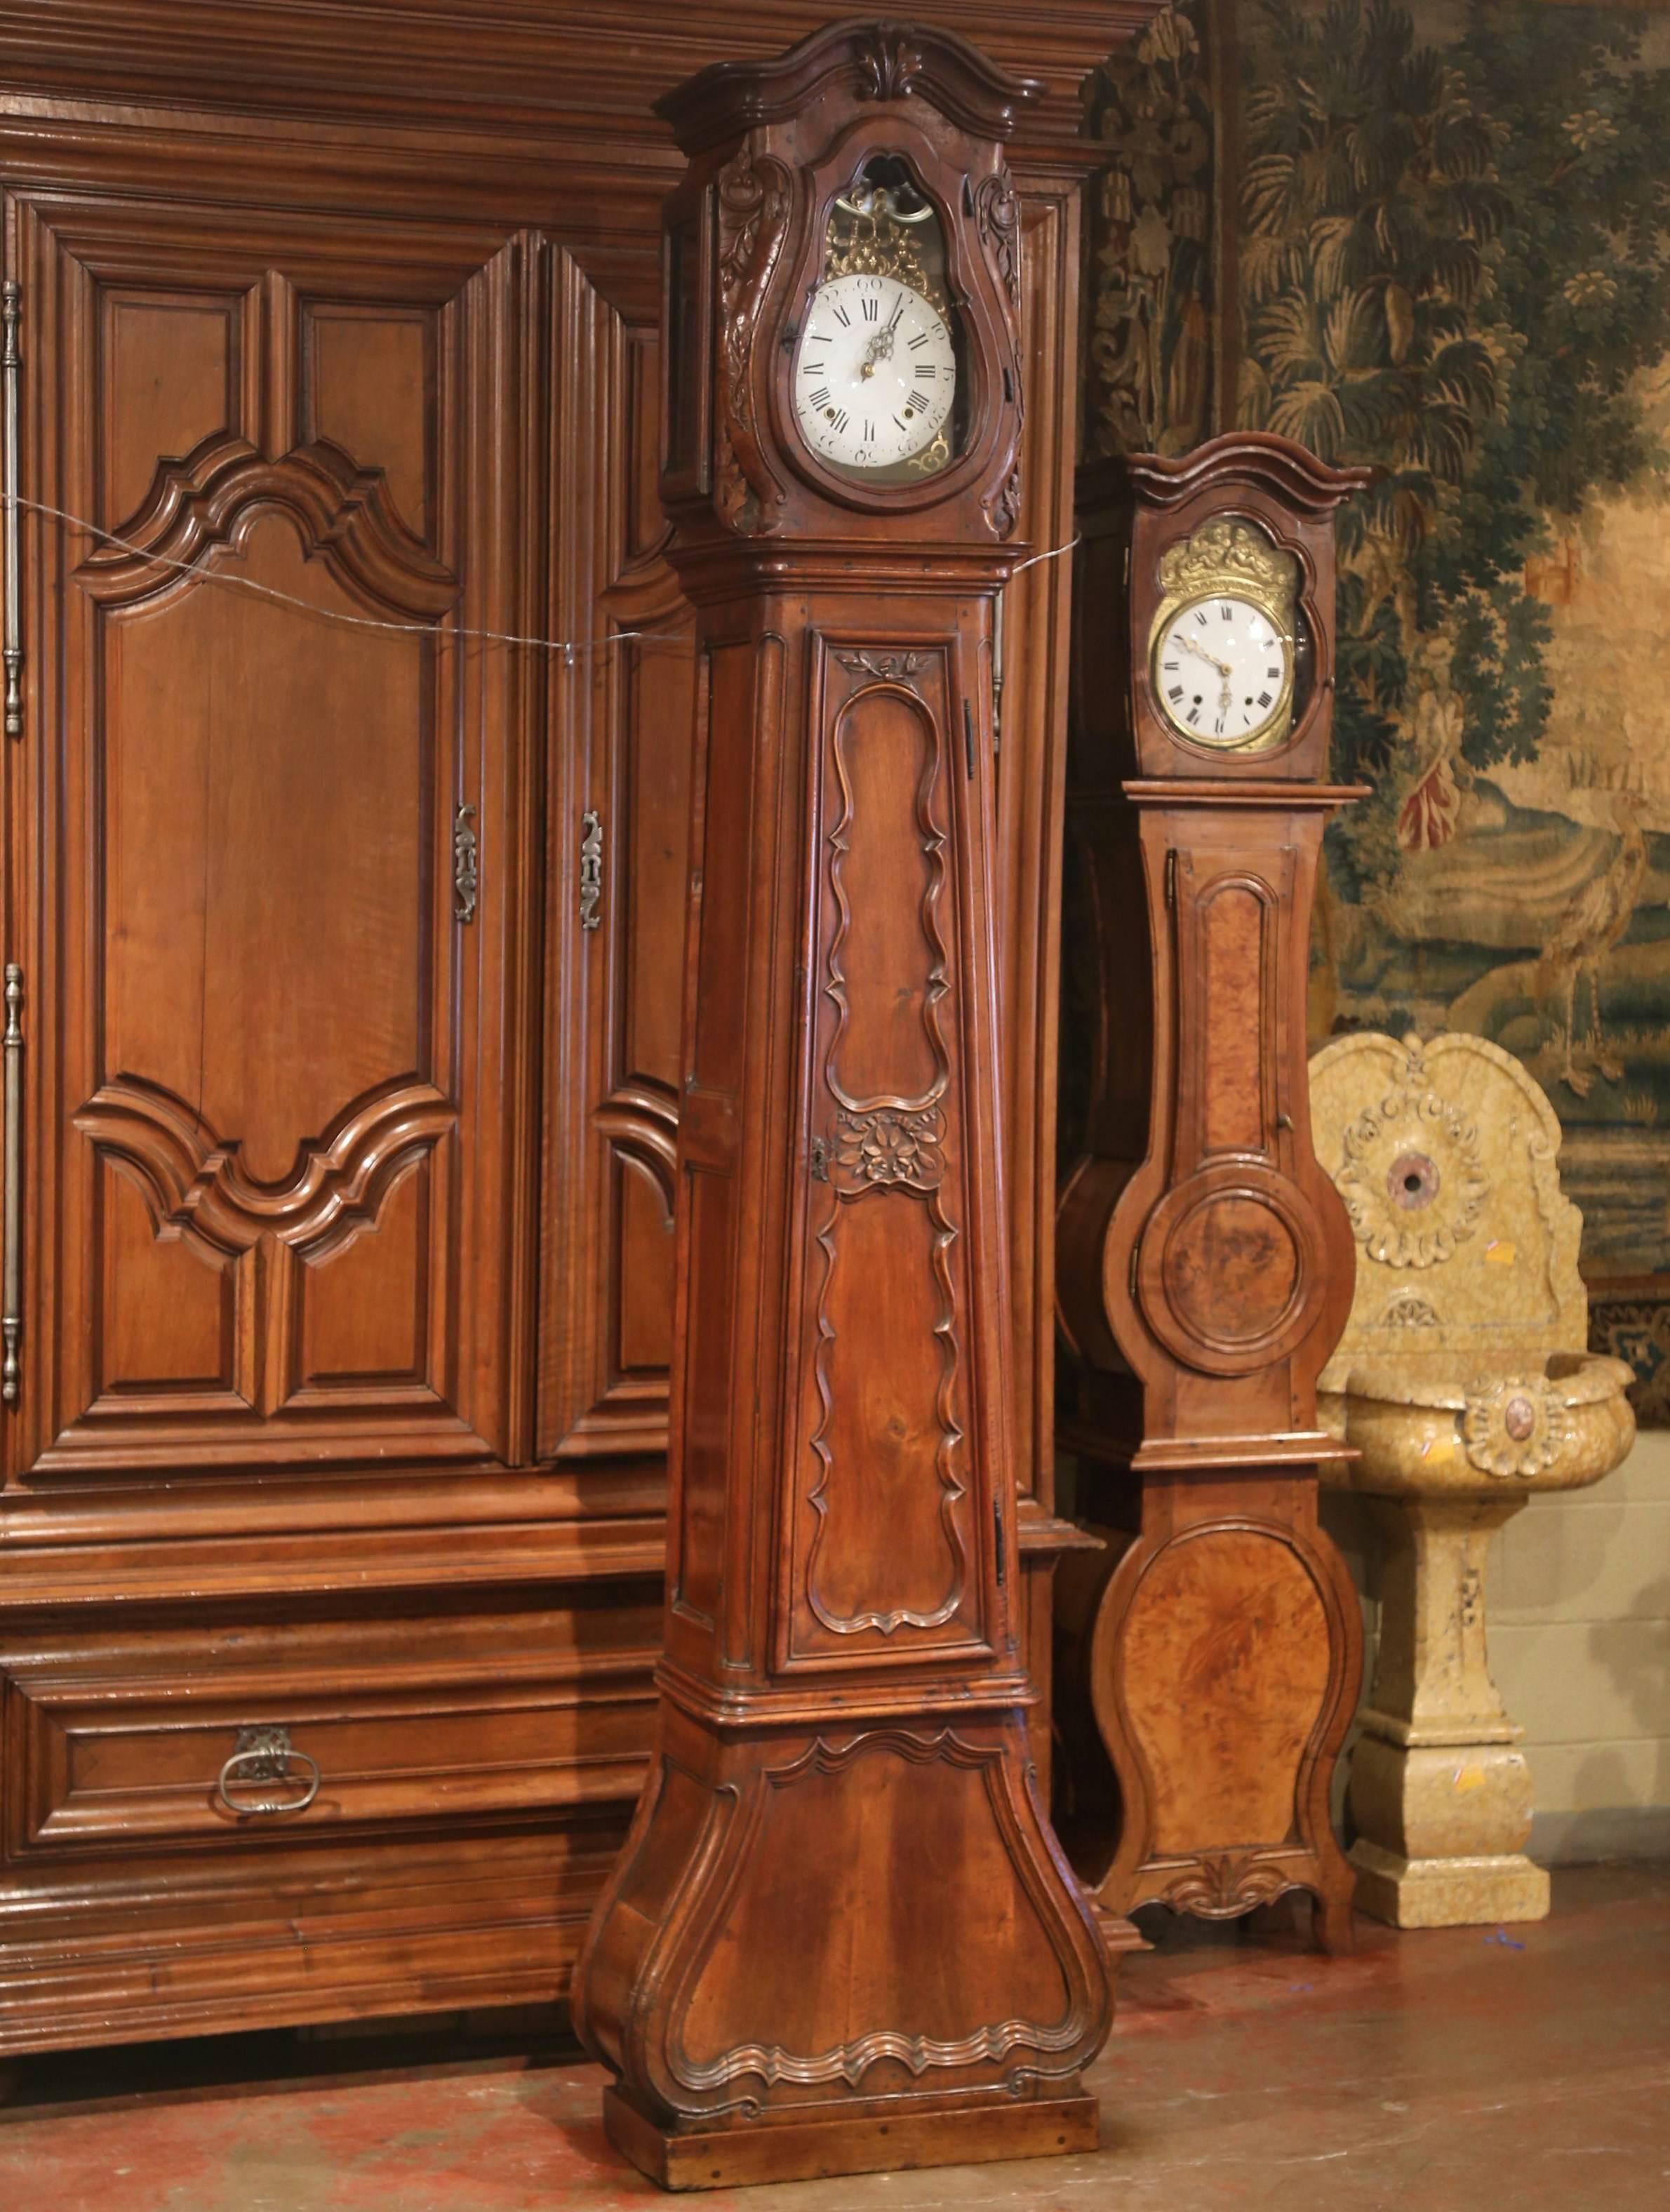 This elegant, antique long case clock was crafted in Lyon, France, circa 1760. The tall fruitwood grandfather clock features beautiful carved lines with a bonnet top, flowers and leaves on the doors and a bowed base. The clock mechanism has been